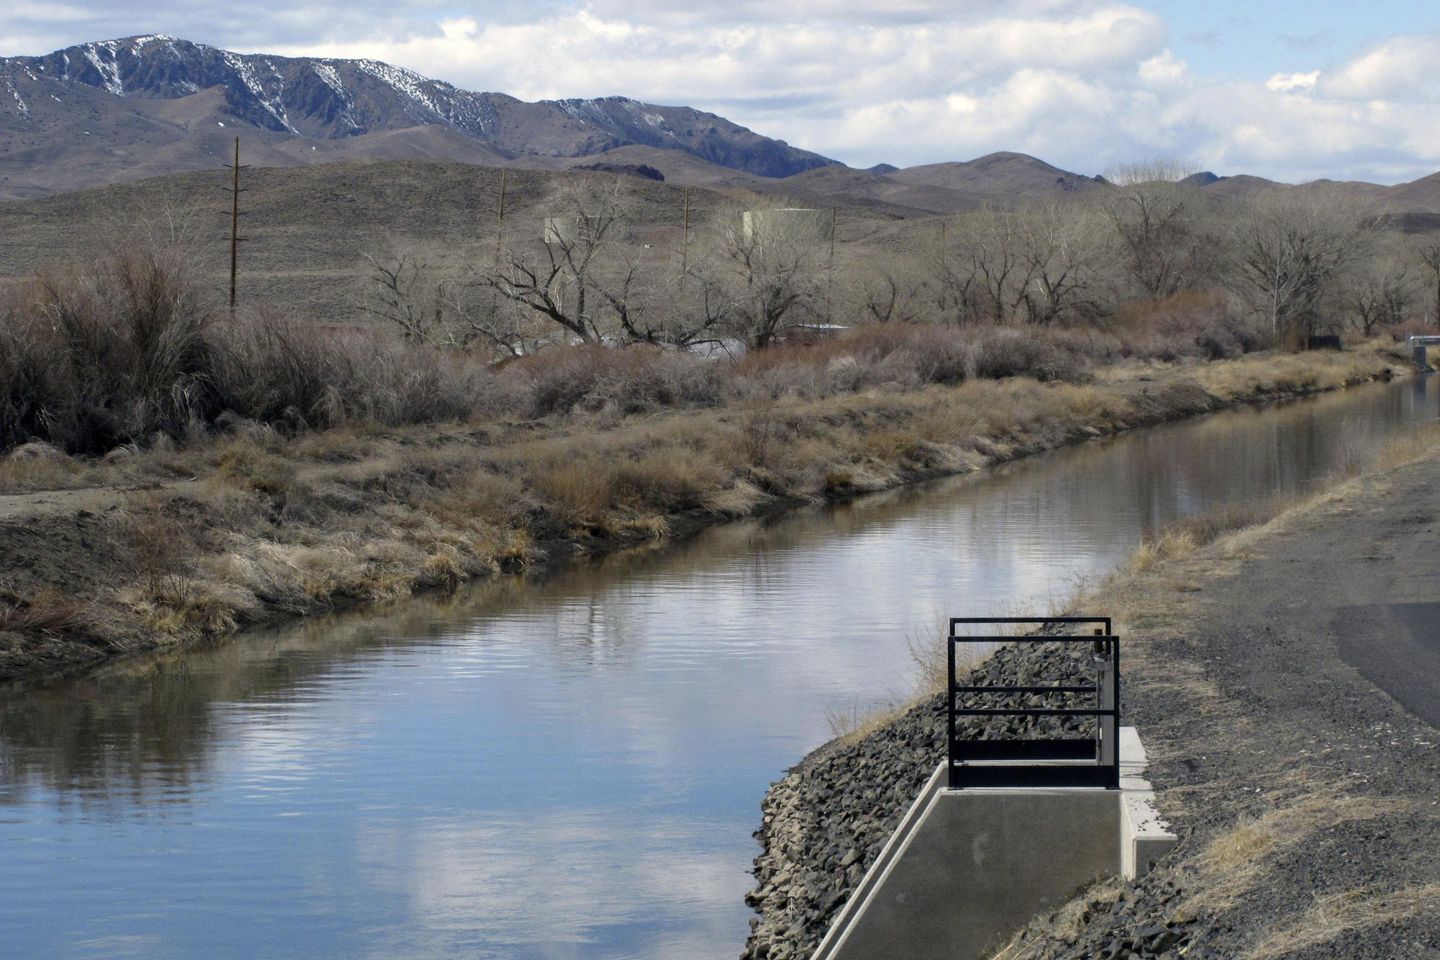 Nevada fight over leaky irrigation canal and groundwater more complicated than it appears on surface